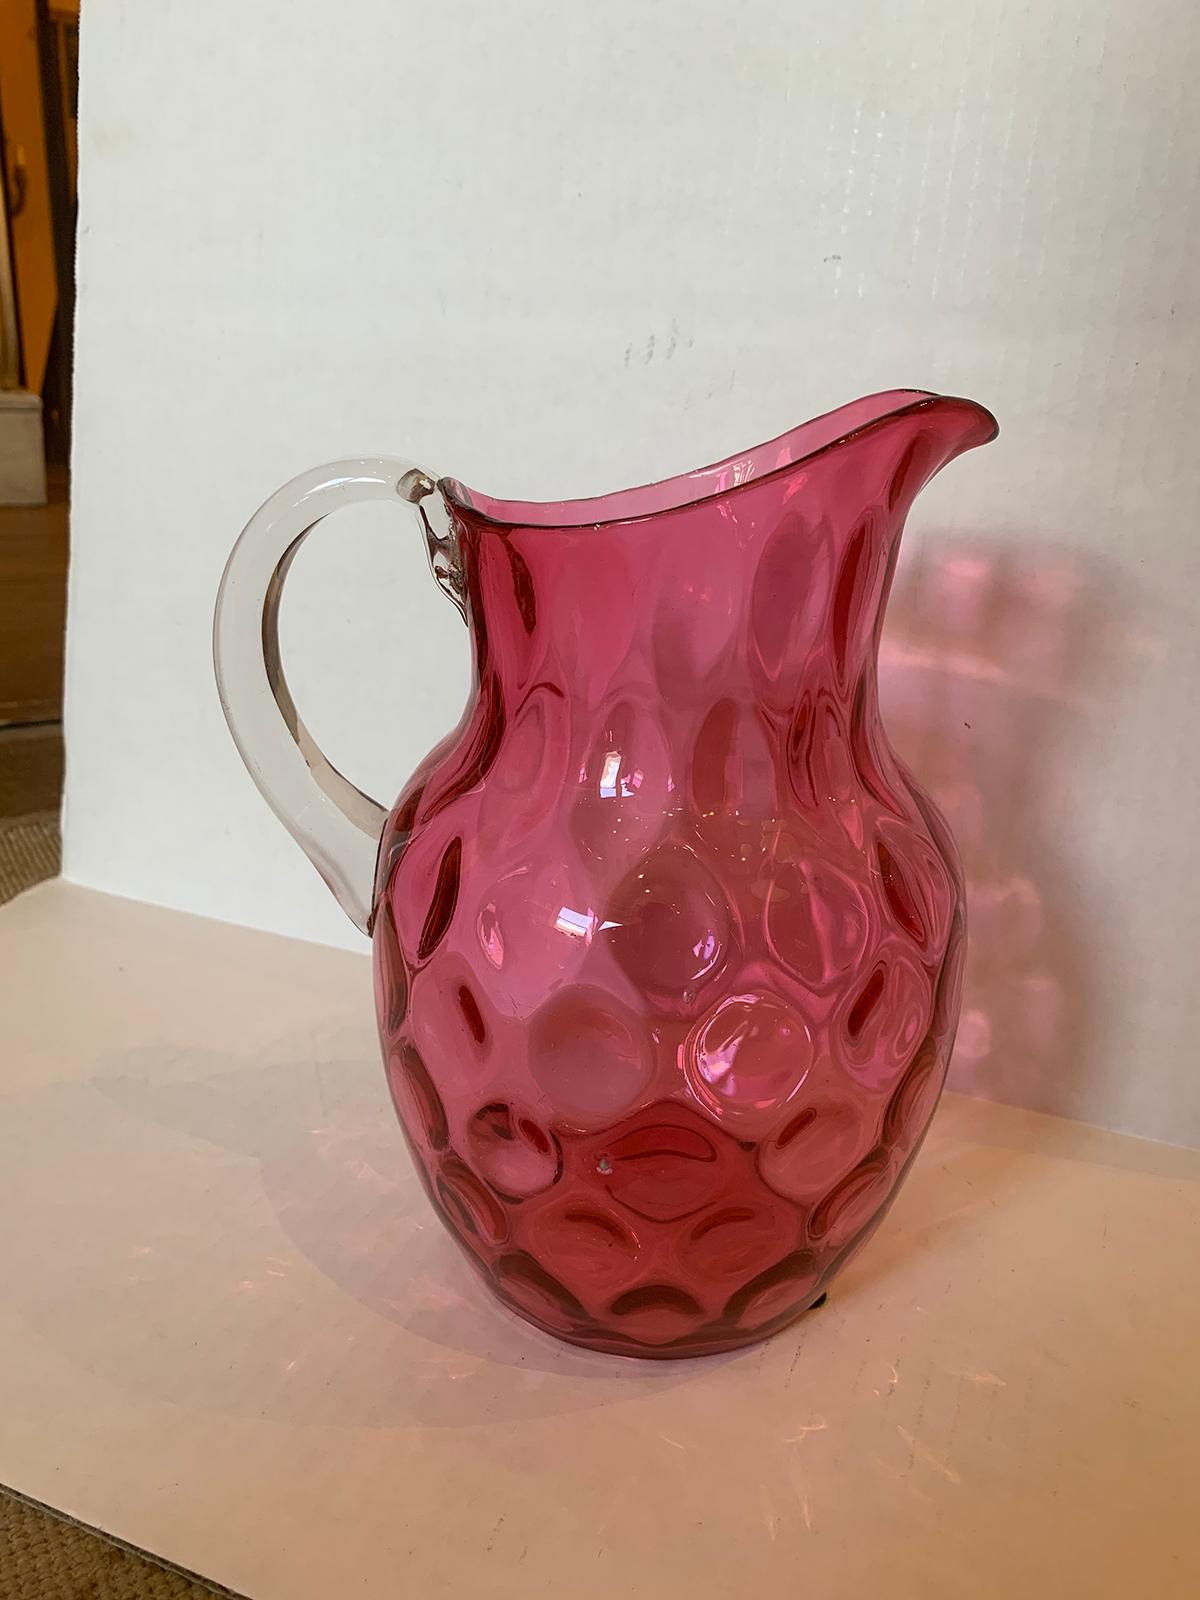 19th century circa 1880 cranberry glass thumbprint pattern water pitcher with applied clear handle, possibly Fenton.